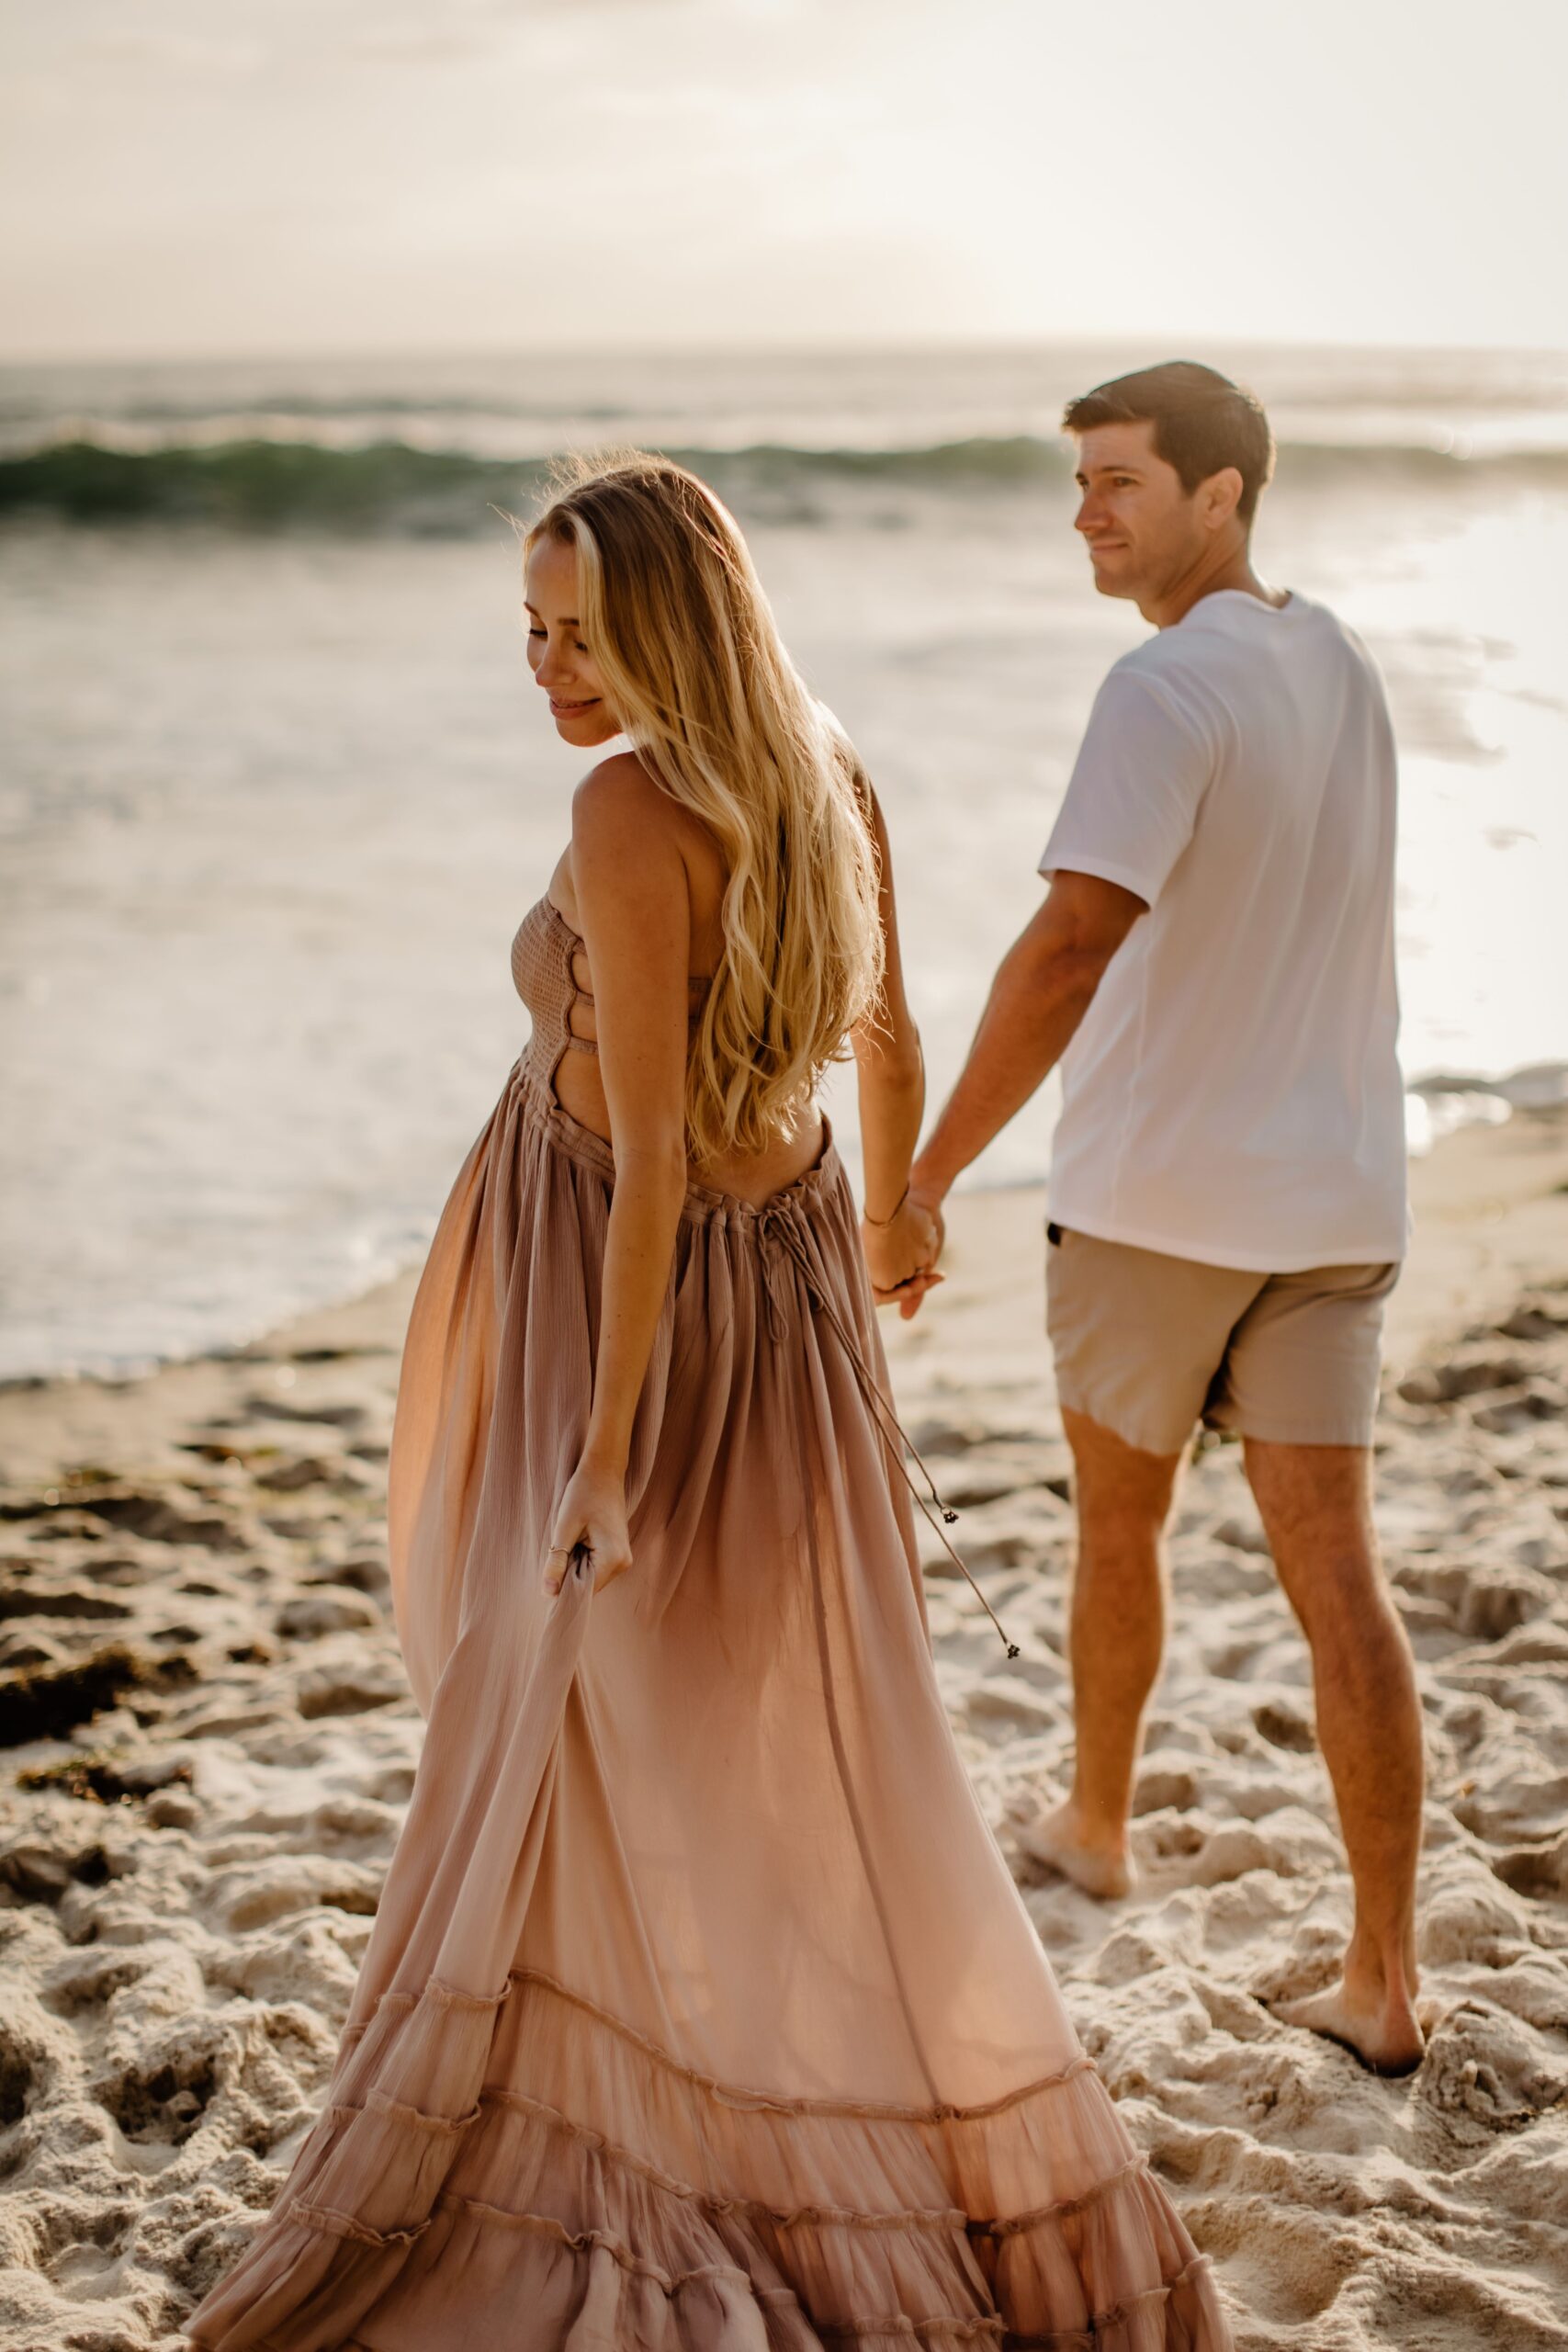 Pregnant woman and man on the beach walking towards the water